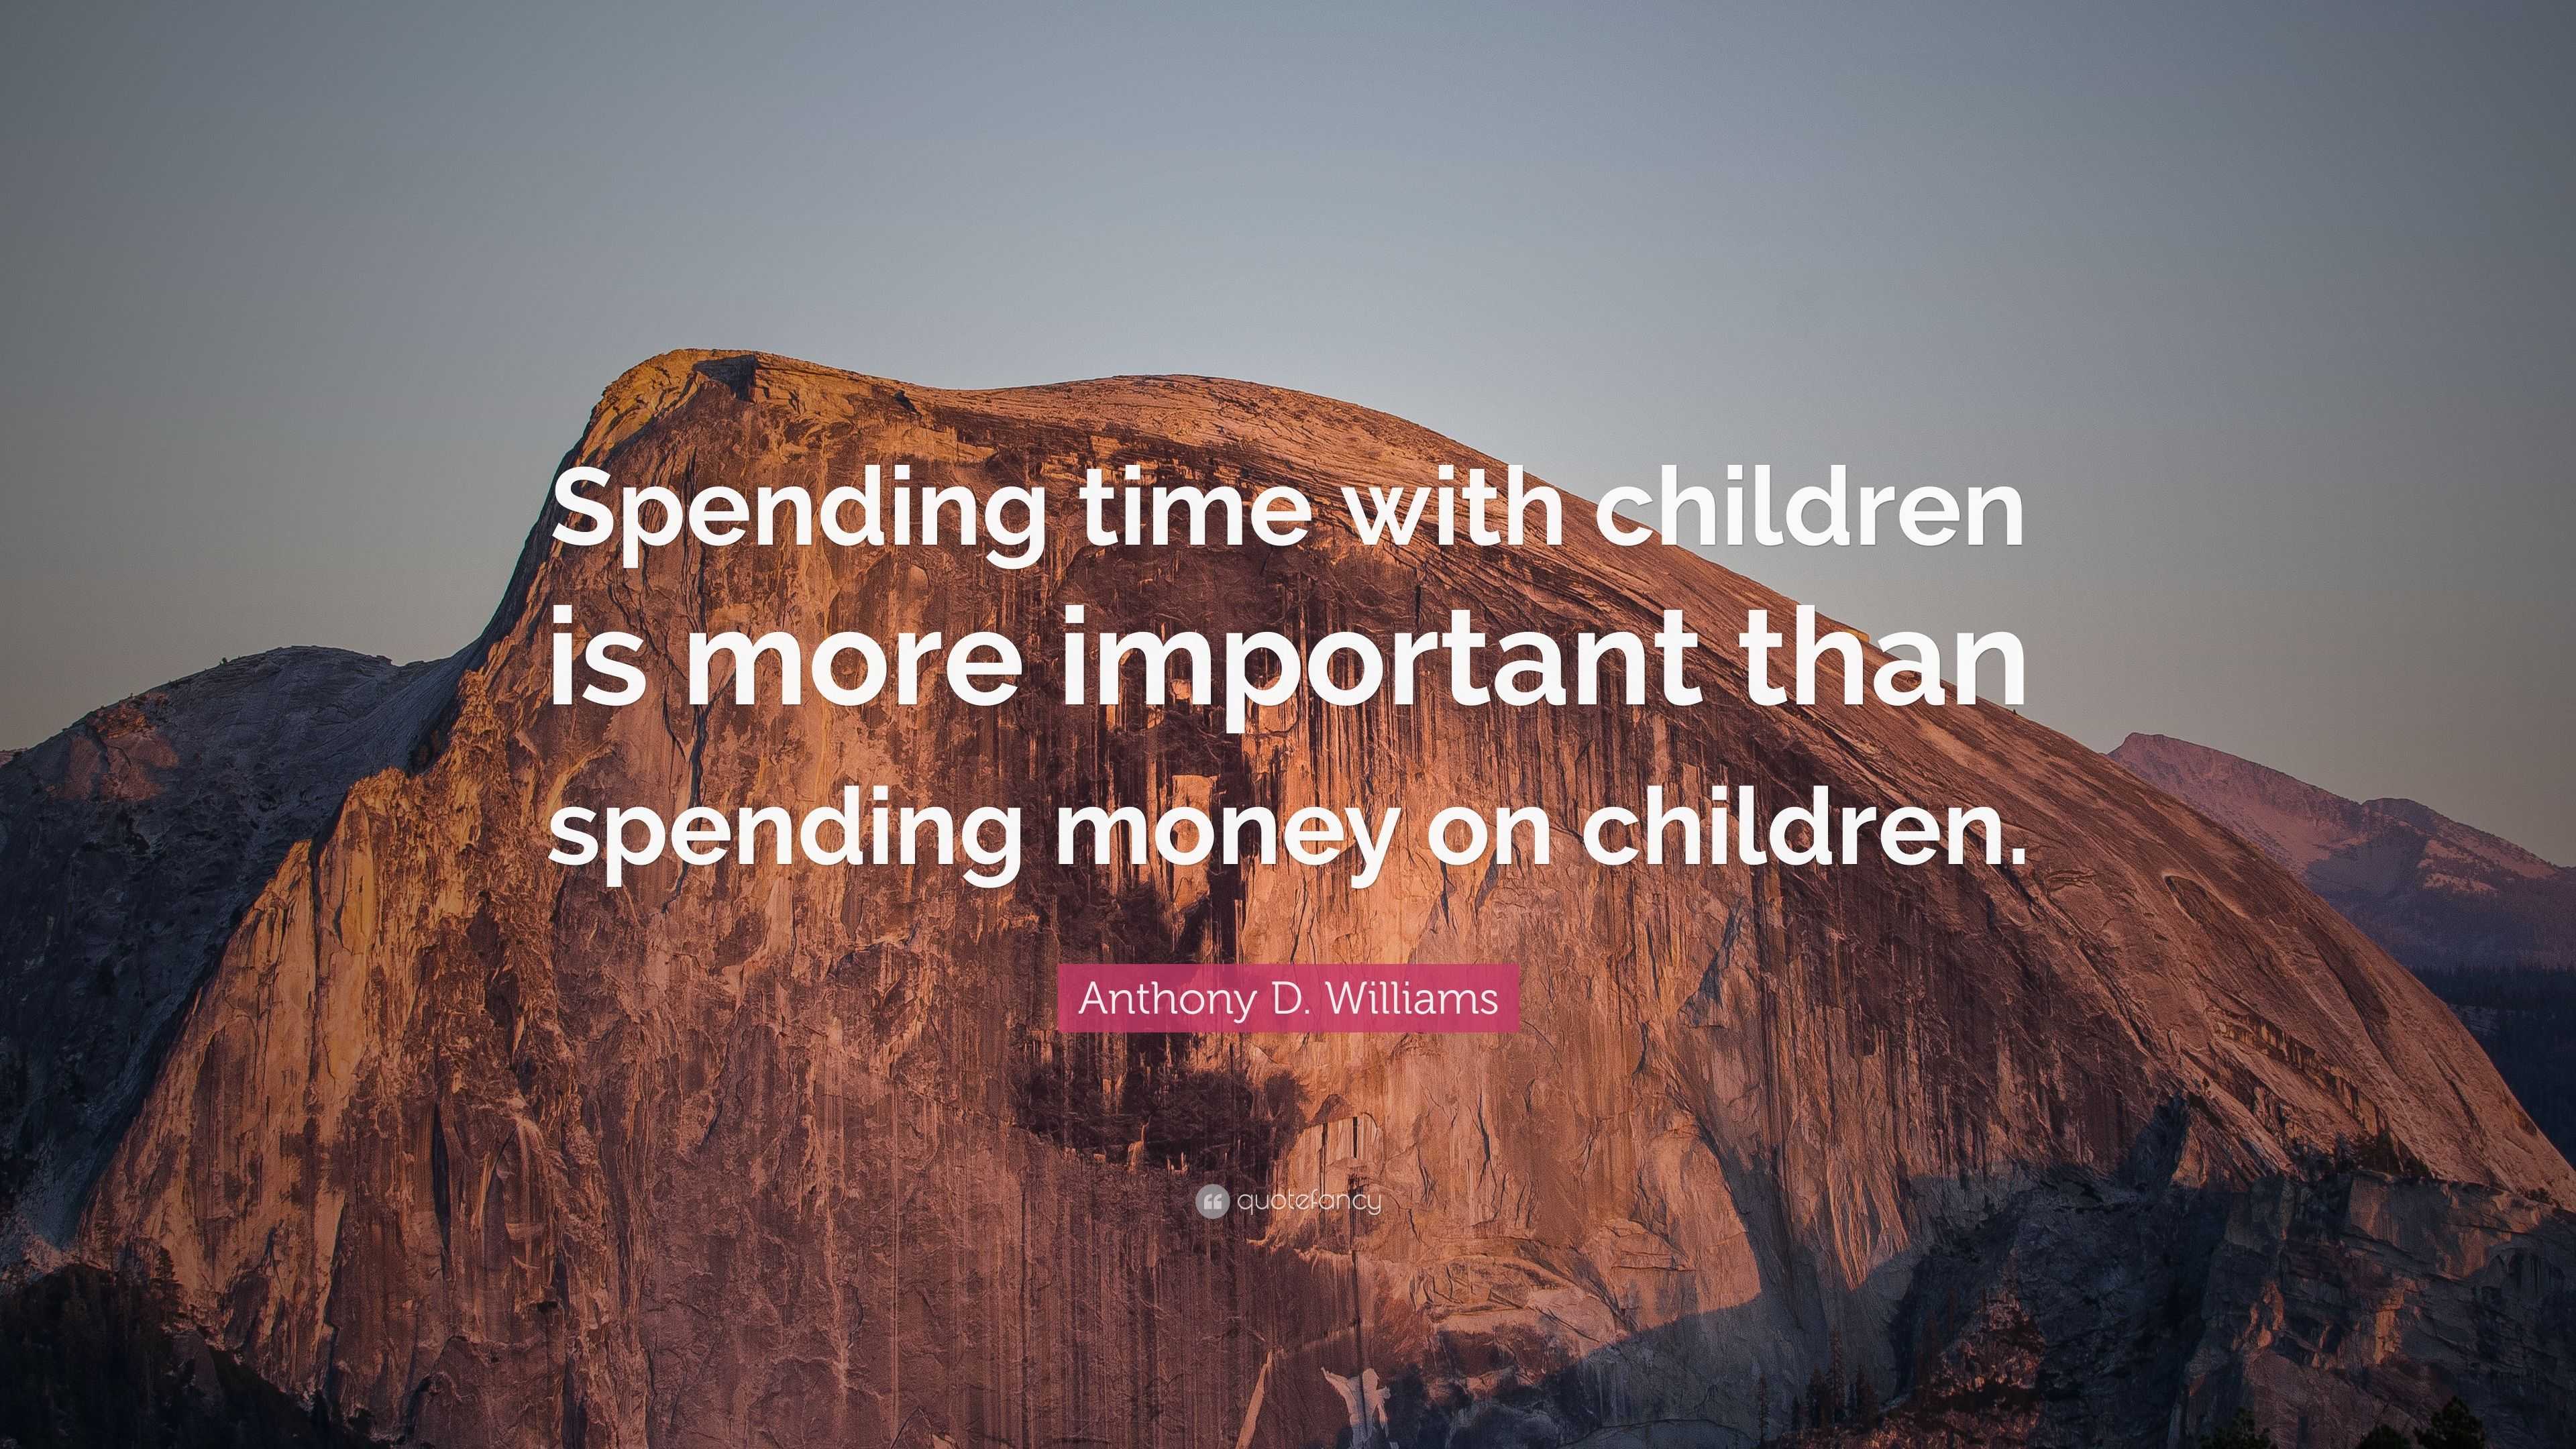 Anthony D. Williams Quote: “Spending time with children is more